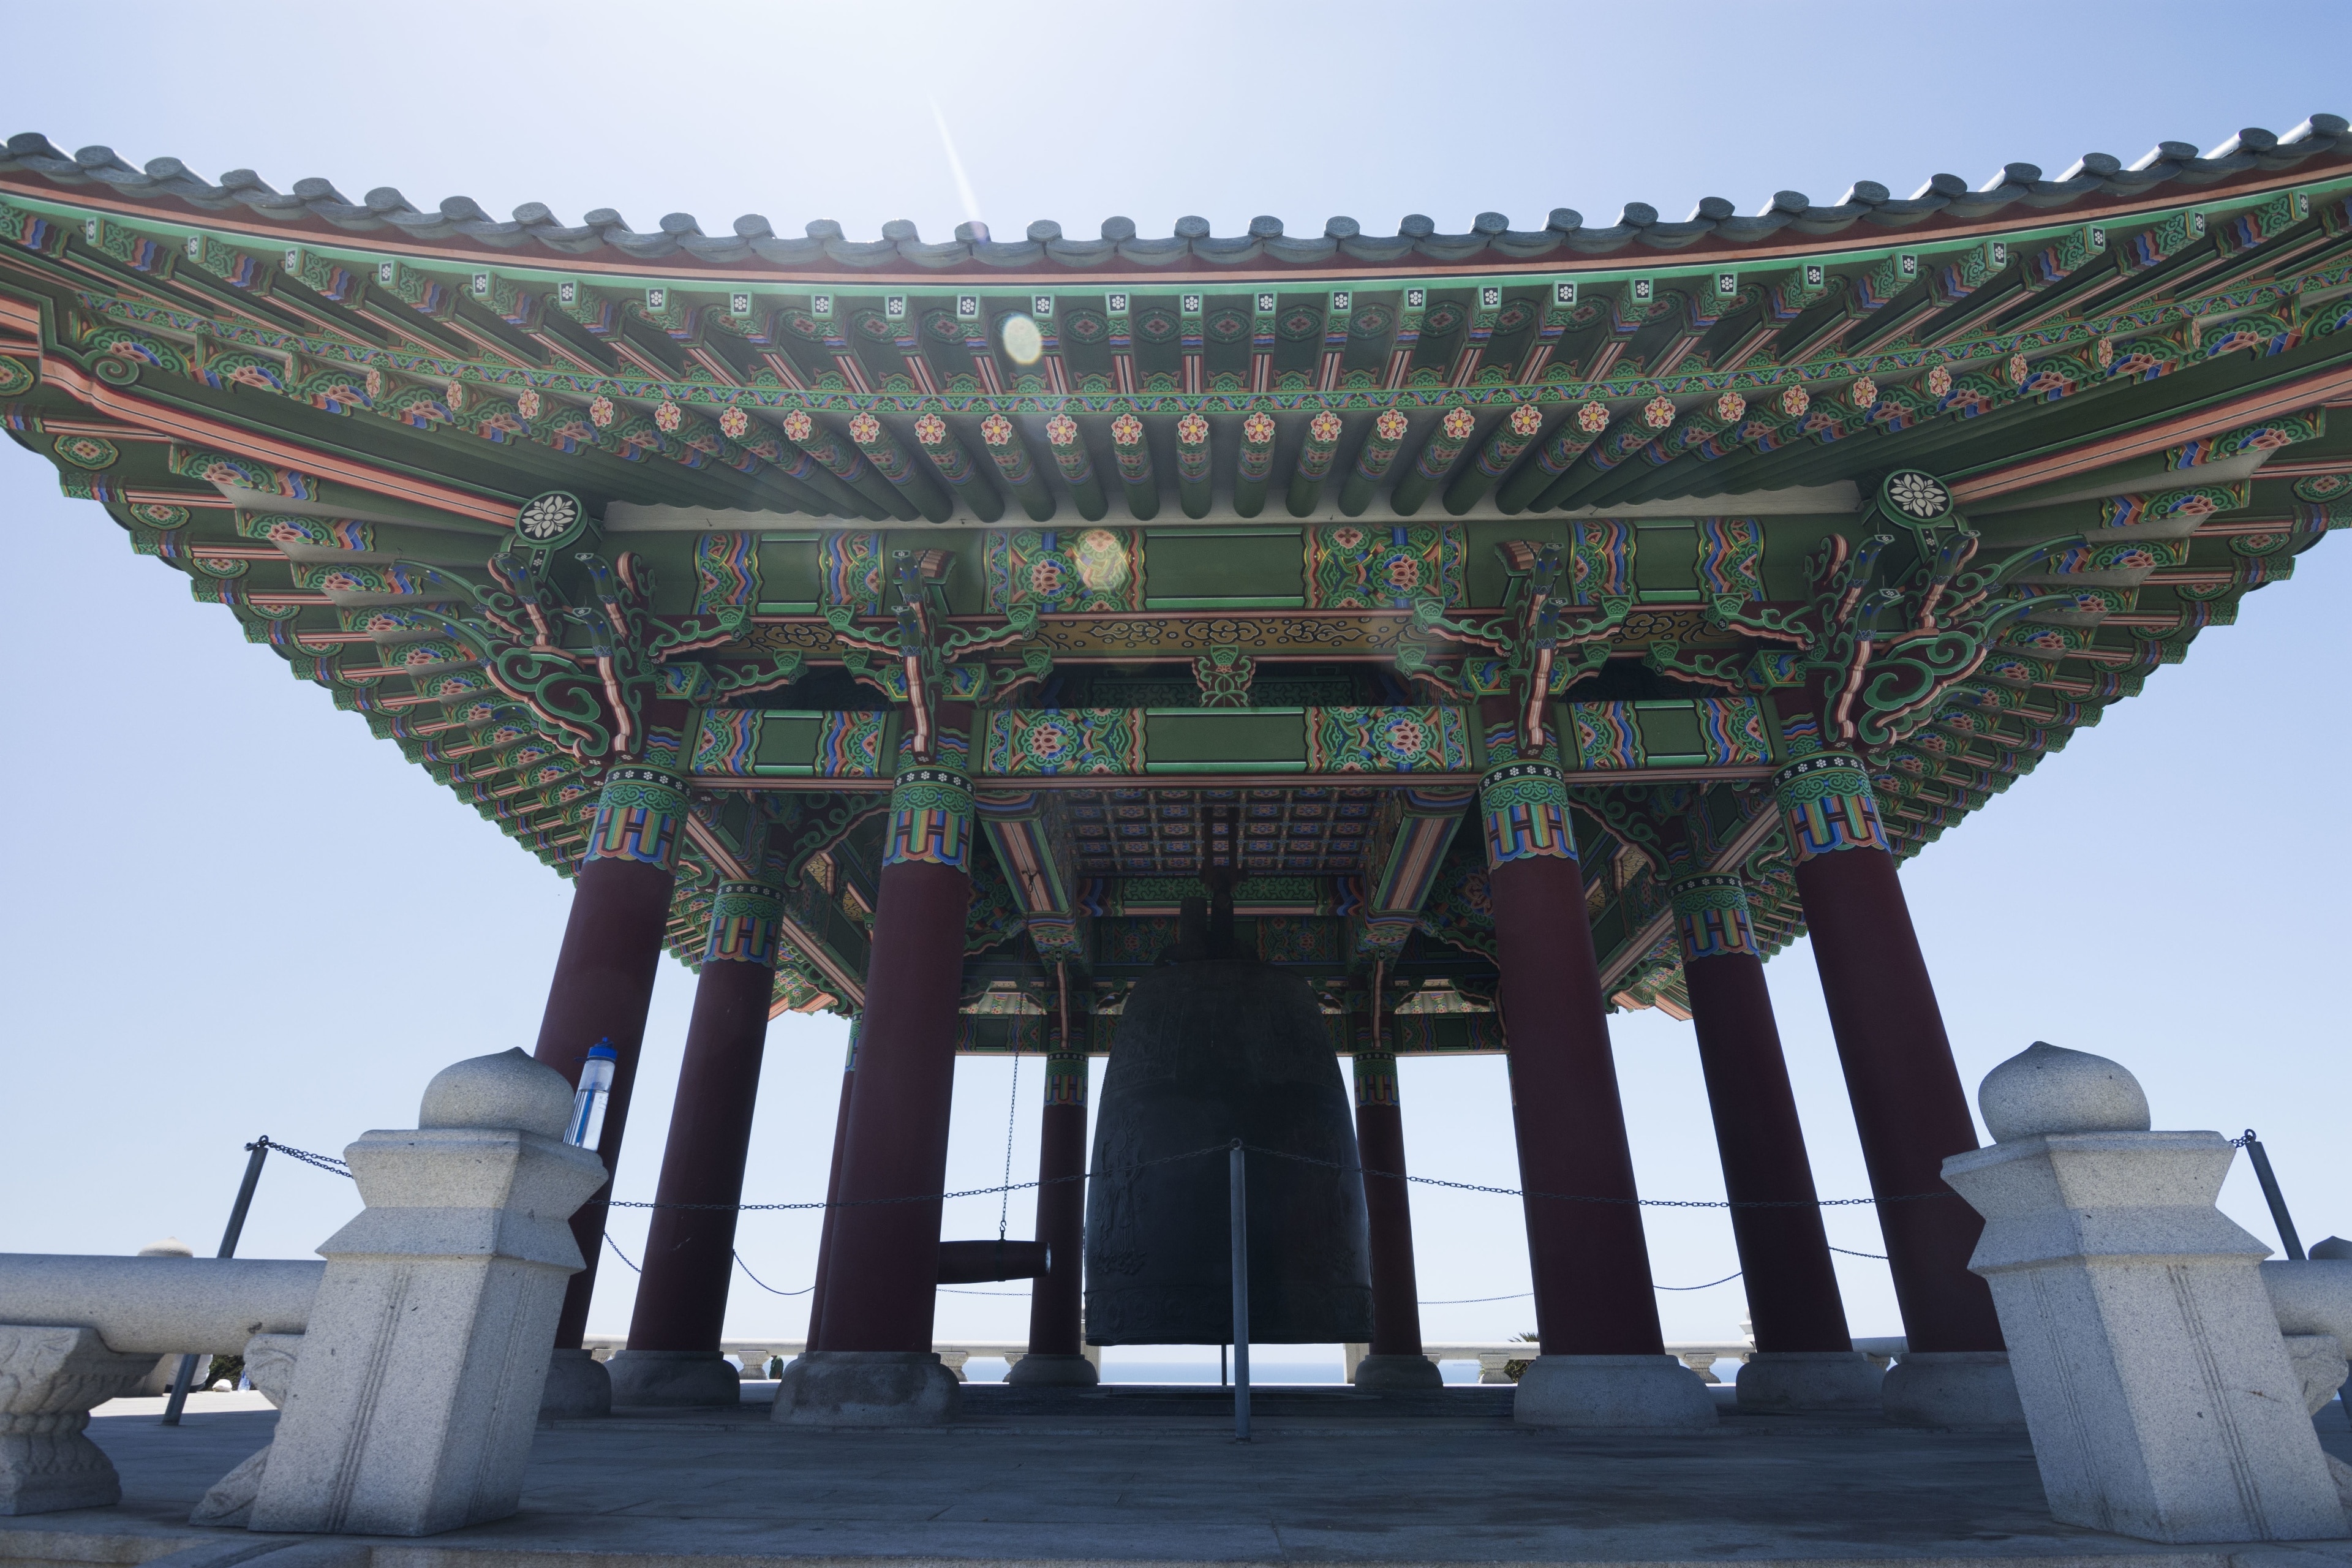 Last year I spent the day driving around Los Angeles with a couple of photography friends.  As we arrived at the Korean Friendship Bell I shot this picture while my buddy shot his composition standing next to me! 

I honestly didn't care for this picture when it was shot and we were going to reshoot during a sunset at a later date...then my friend died and I have found a different level of appreciation for this picture!
I will always remember his generosity, crazy sense of humor, and his love for his two children!

RIP Thomas Allen Gartner III
